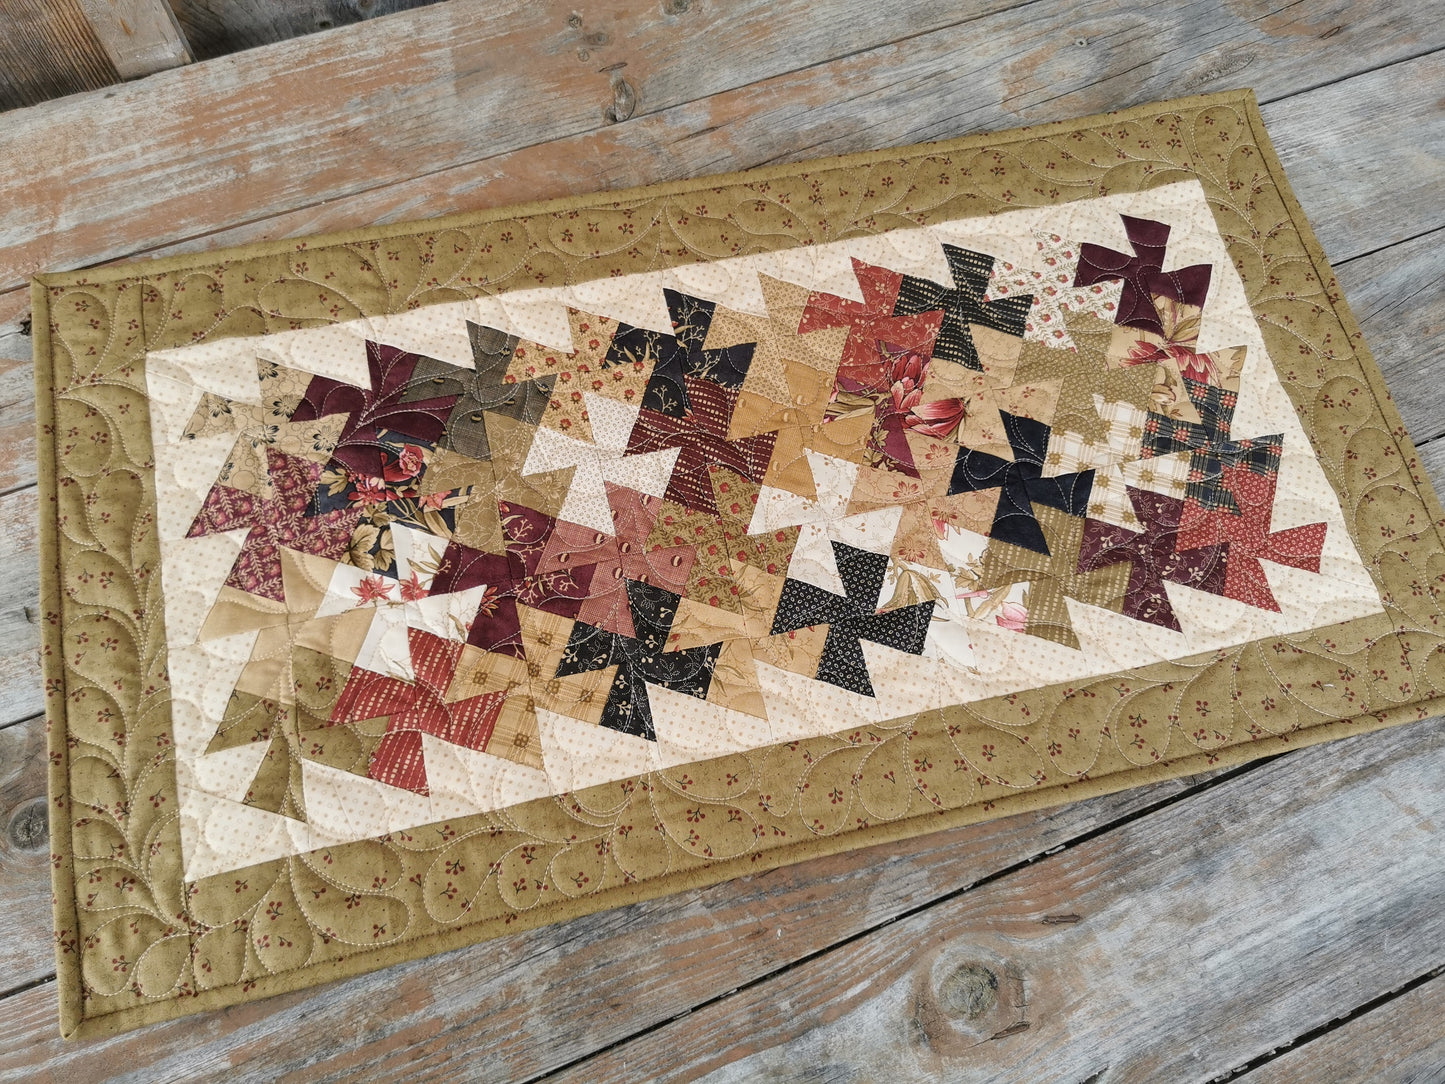 The quilted table runner is shown on a wooden table in natural outdoor lighting. The entwining patchwork twisters in country colors are so interesting and pretty. Colors include beige, brown, dark plum, country red, drab khaki green, charcoal. All fabrics are ccoordinating. 